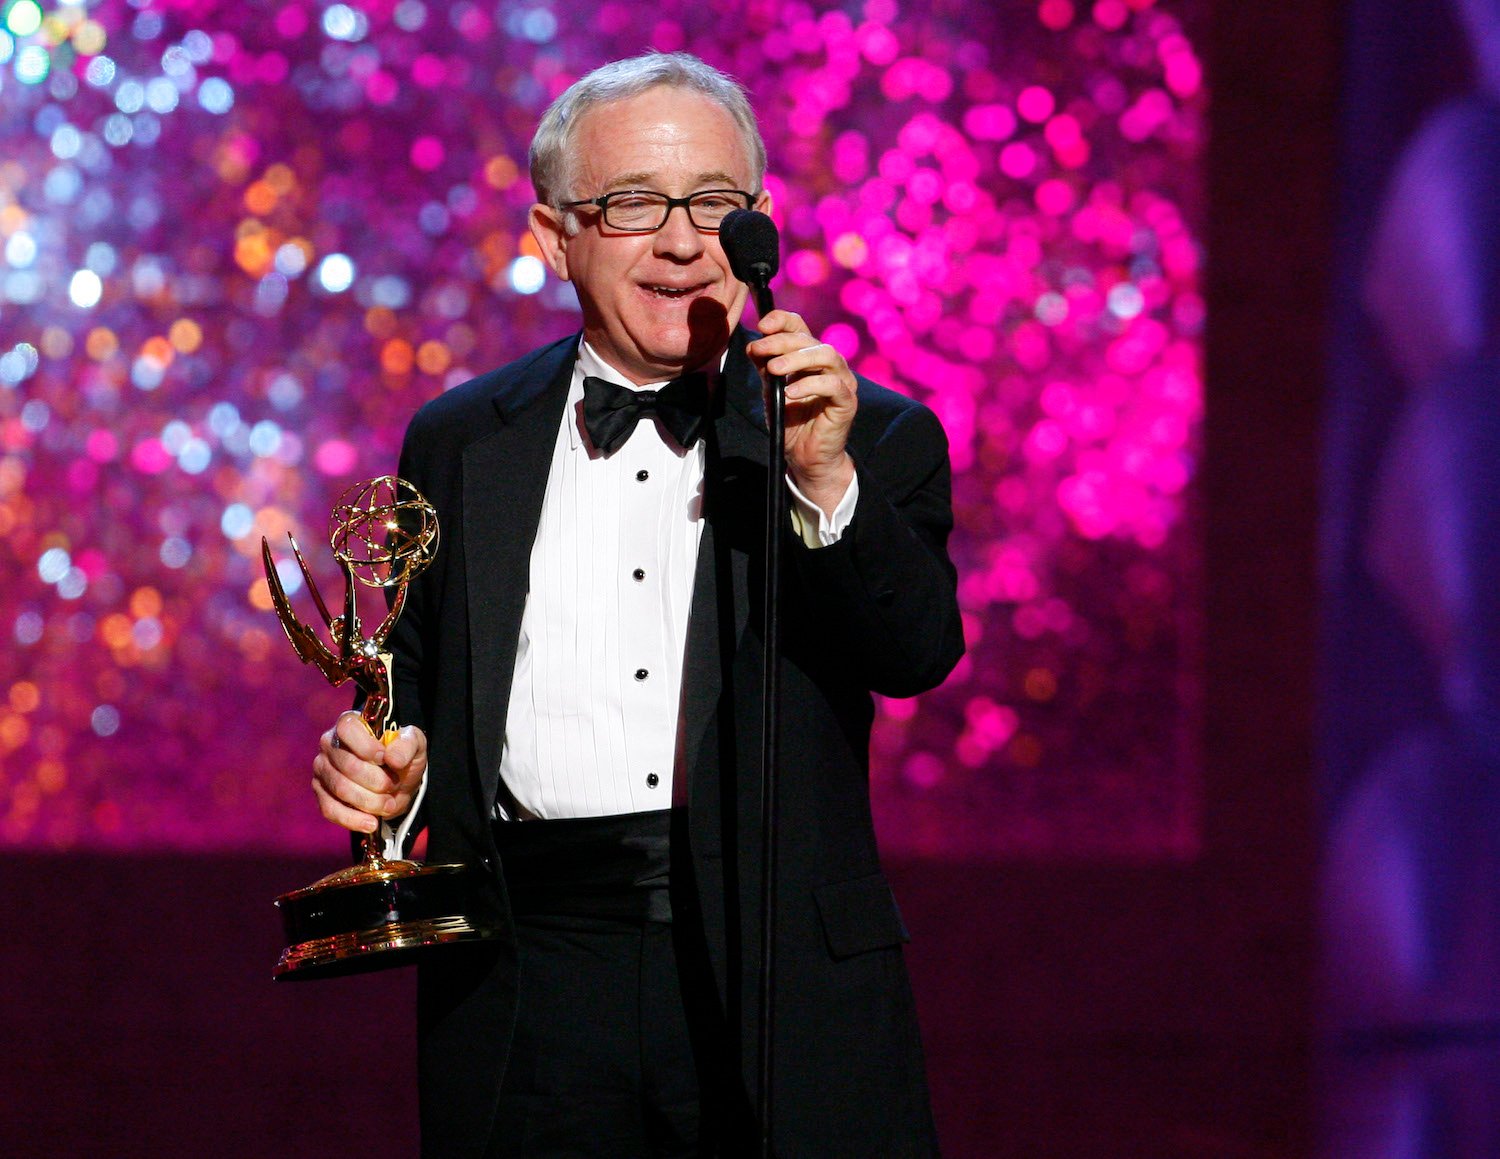 Leslie Jordan wearing a tuxedo and holding an award at the 58th Annual Creative Arts Emmy Awards